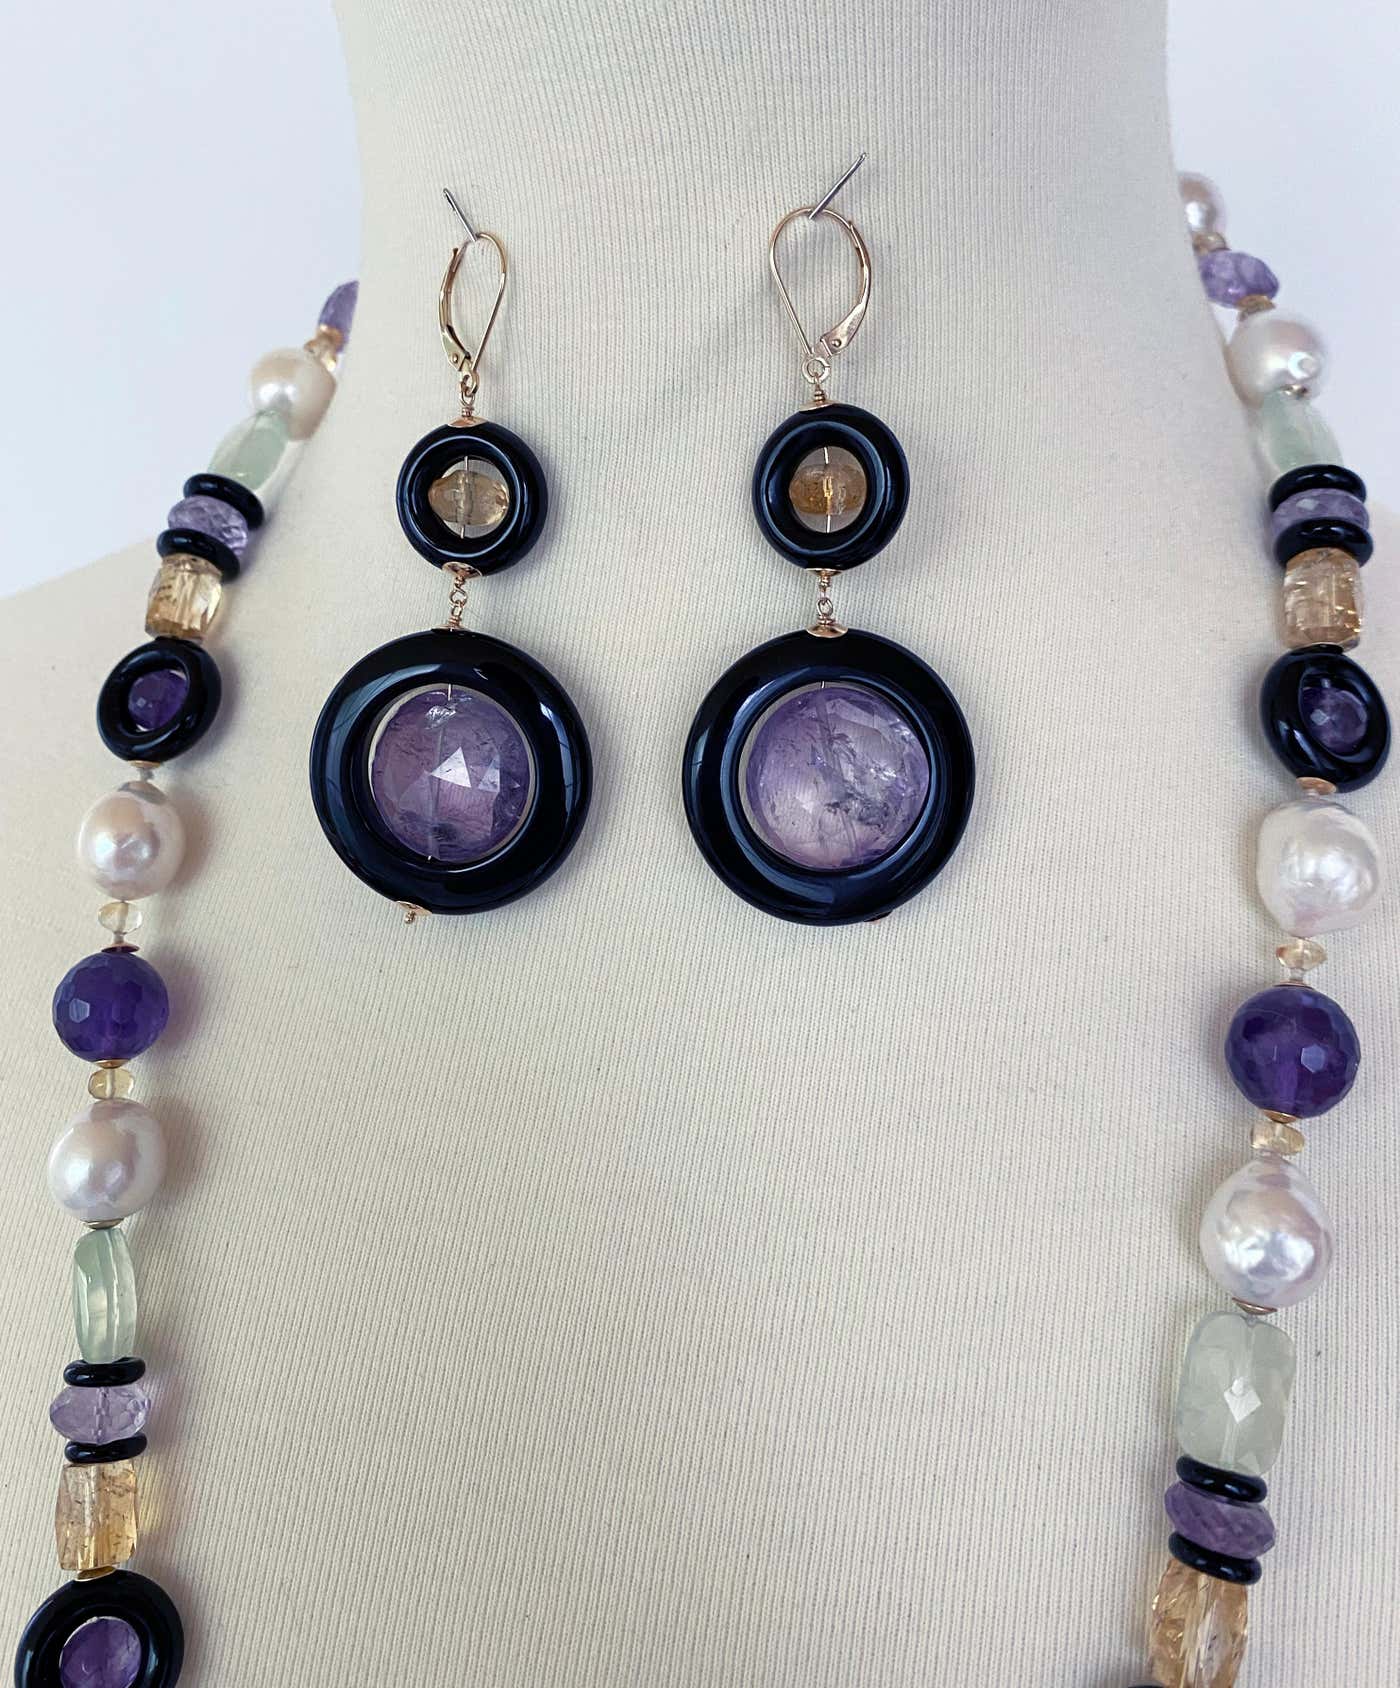 Amethyst, Citrine and Black Onyx Earrings with 14k Yellow Gold